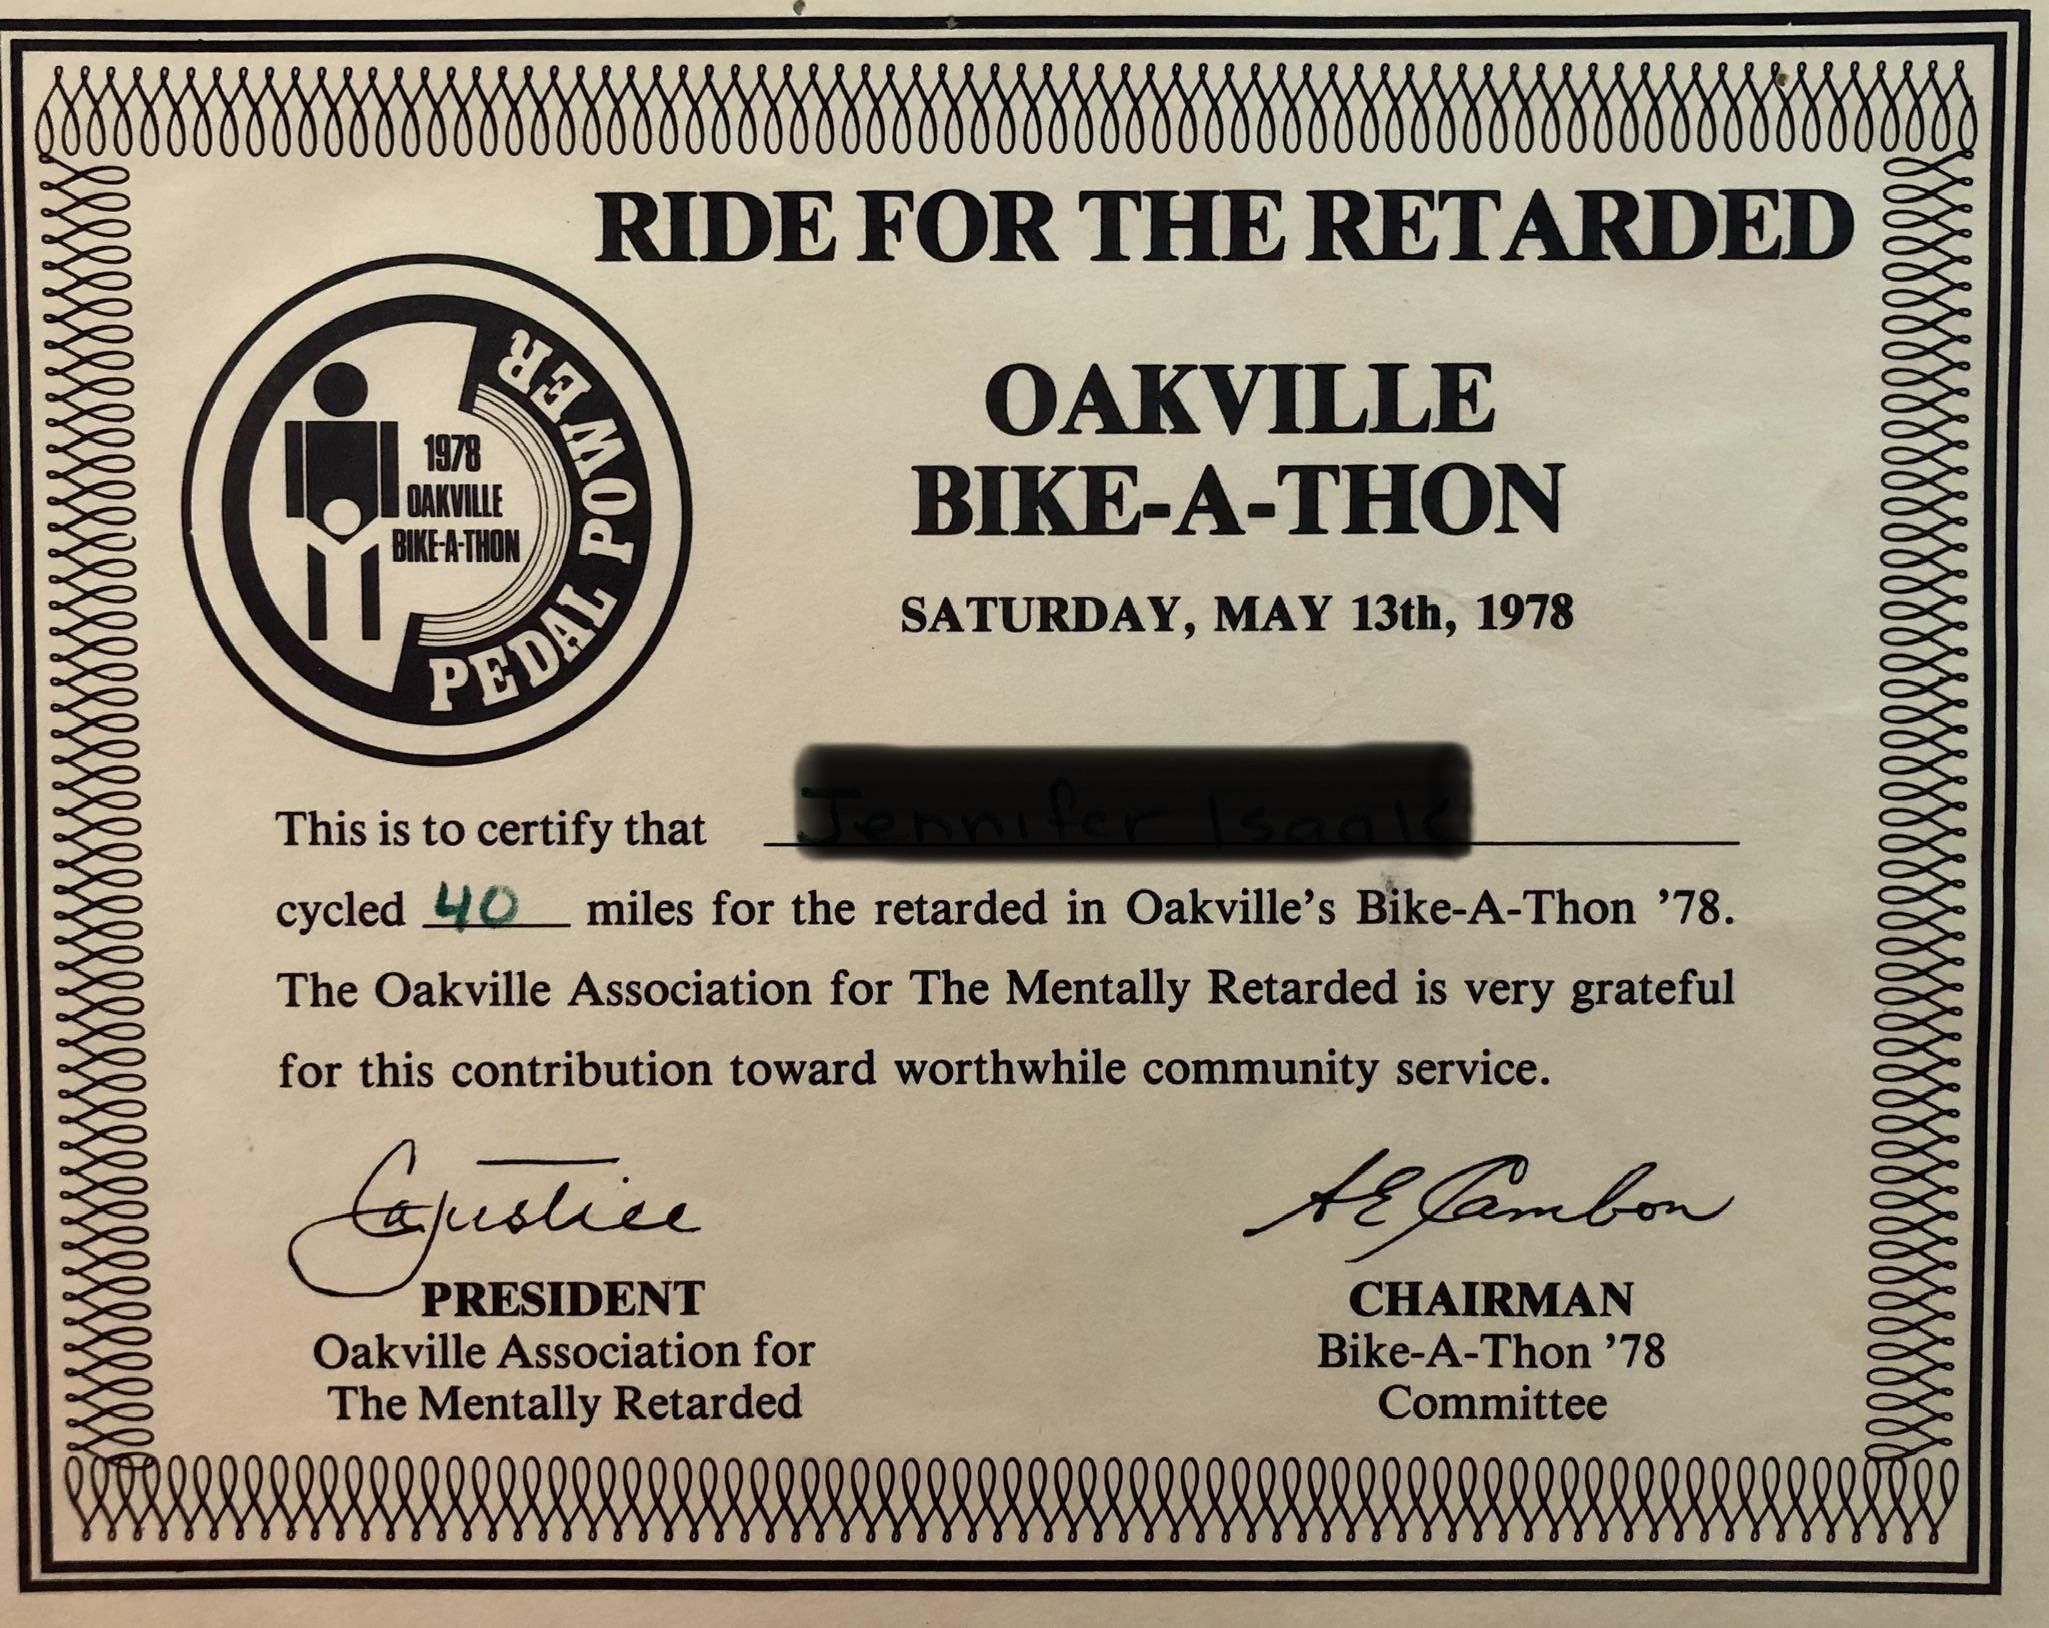 I don’t know if this is the right sub, but this is a real certificate from a fundraising event in the 70’s.